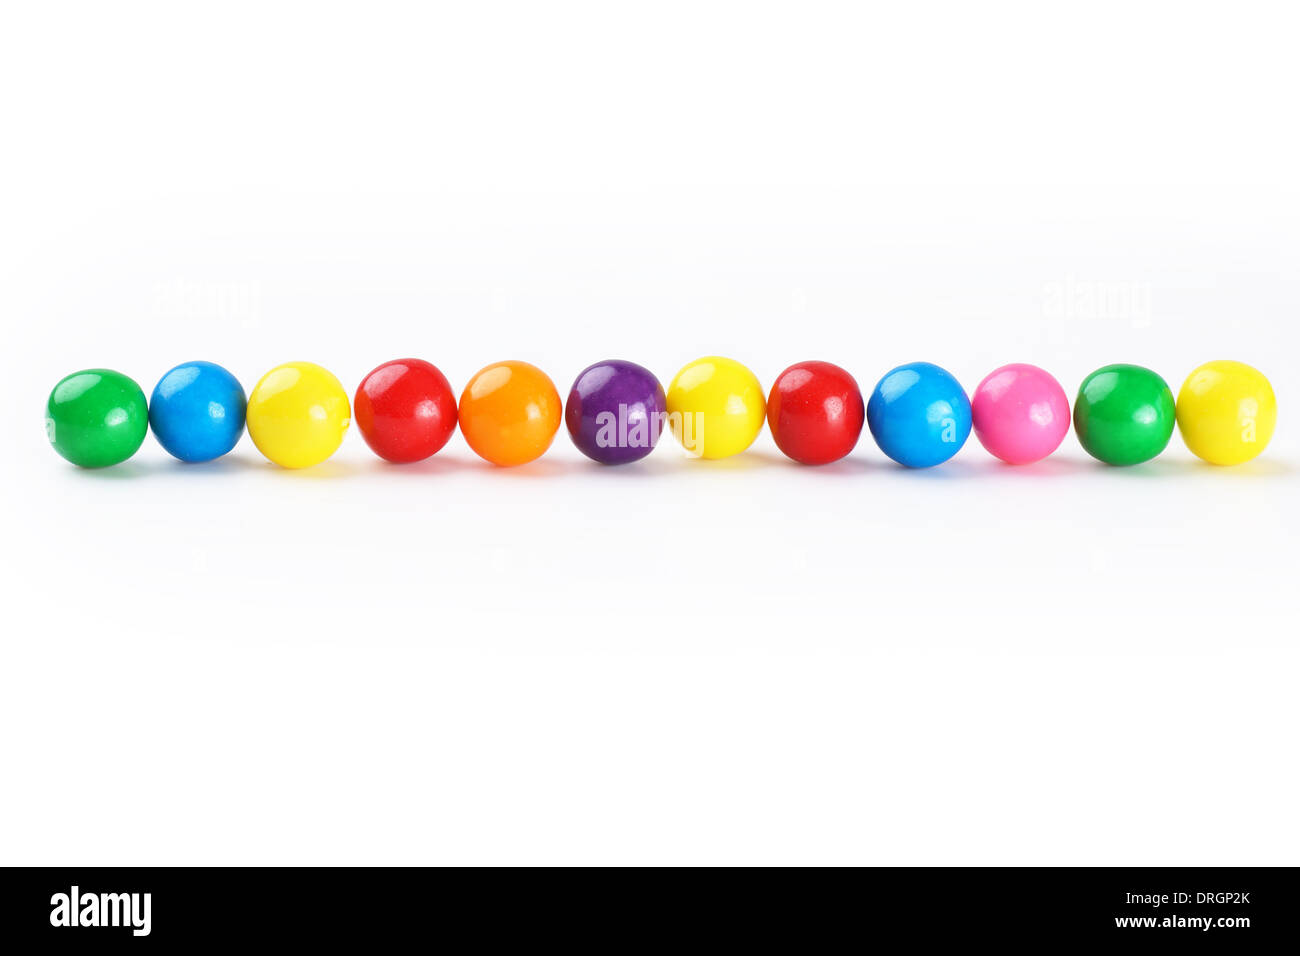 Colorful gumballs border over white background Stock Photo